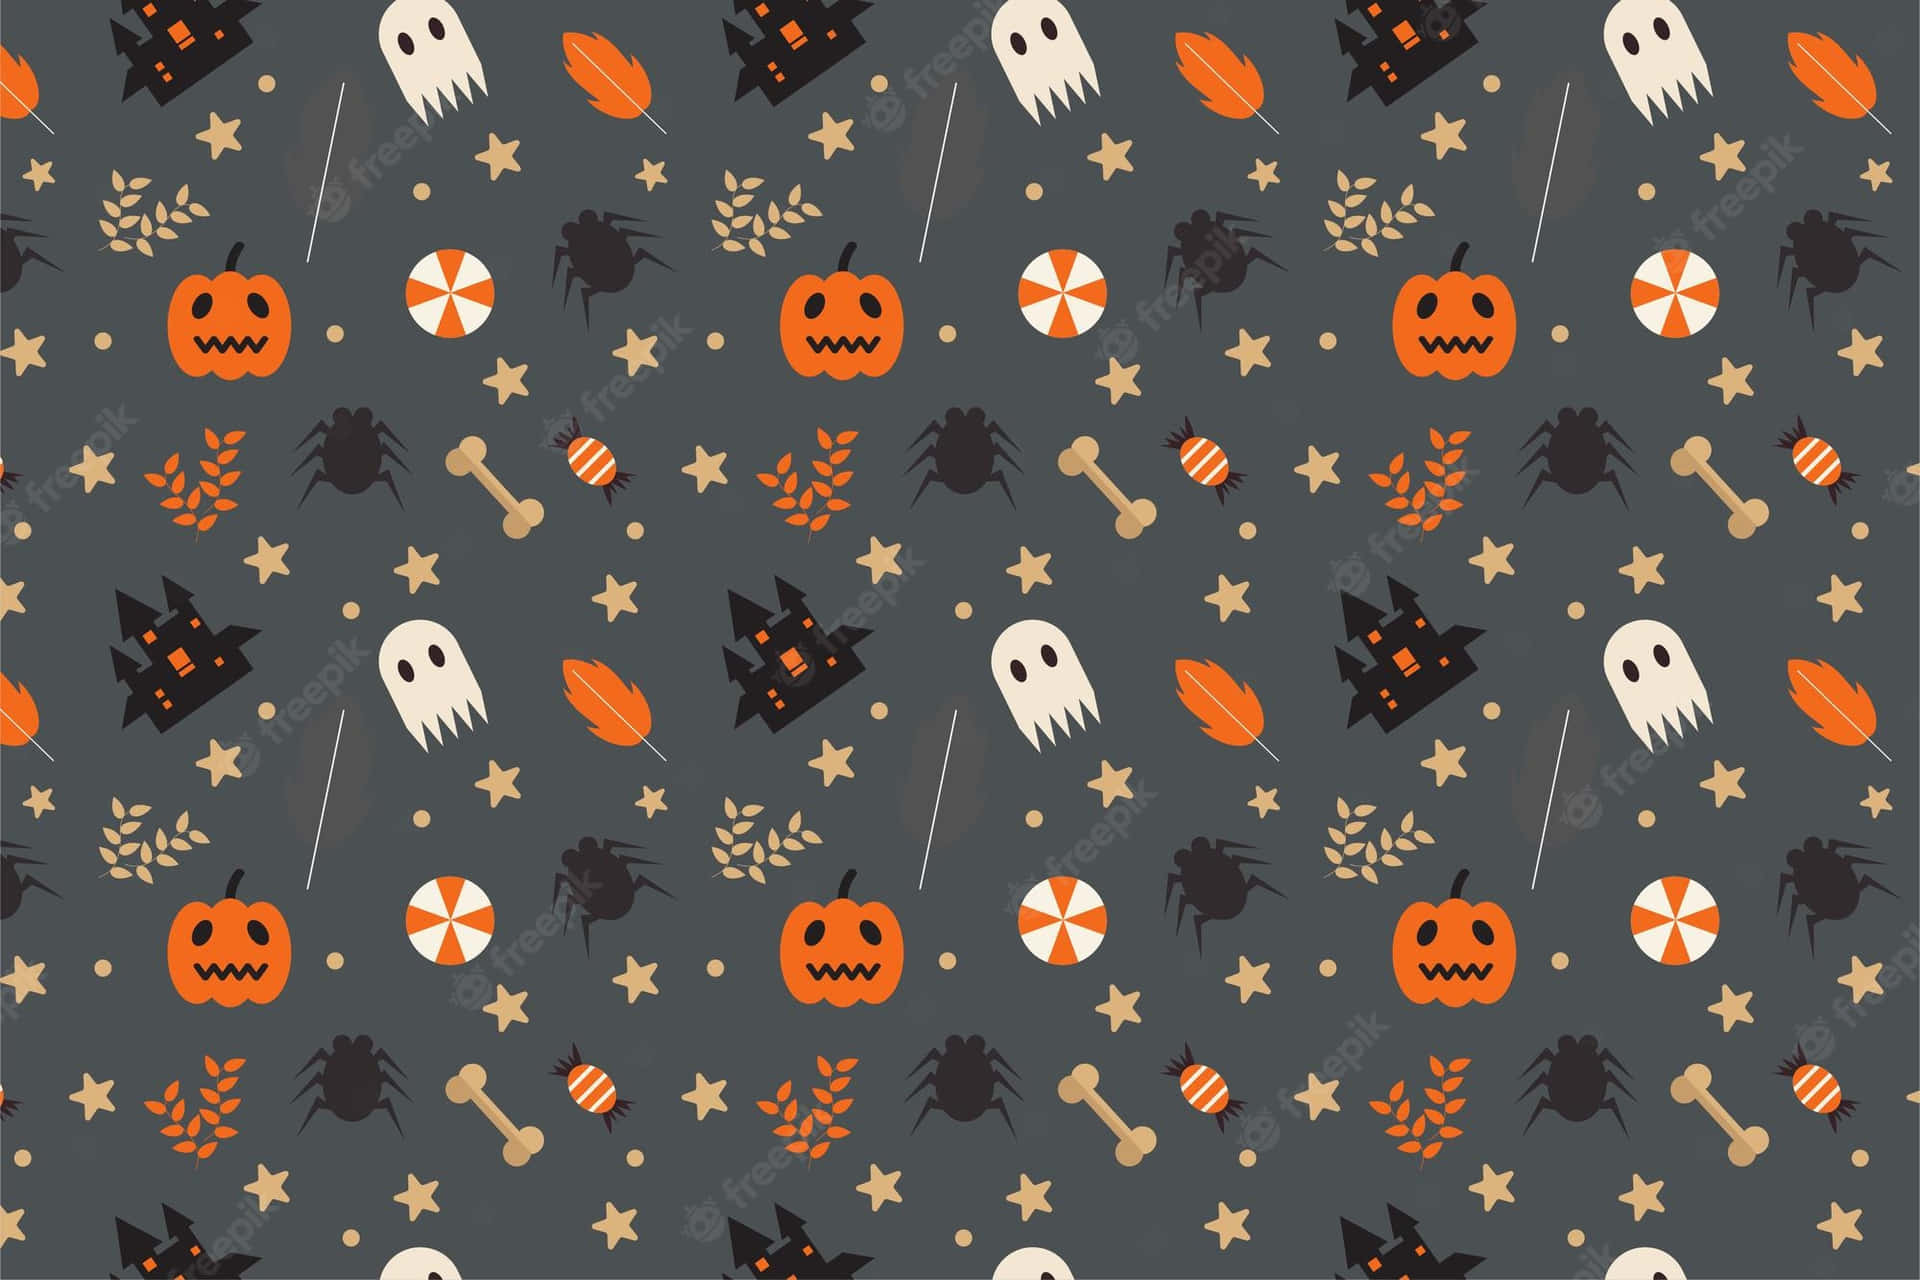 "This Halloween, customize your Macbook and make your work stand out!" Wallpaper